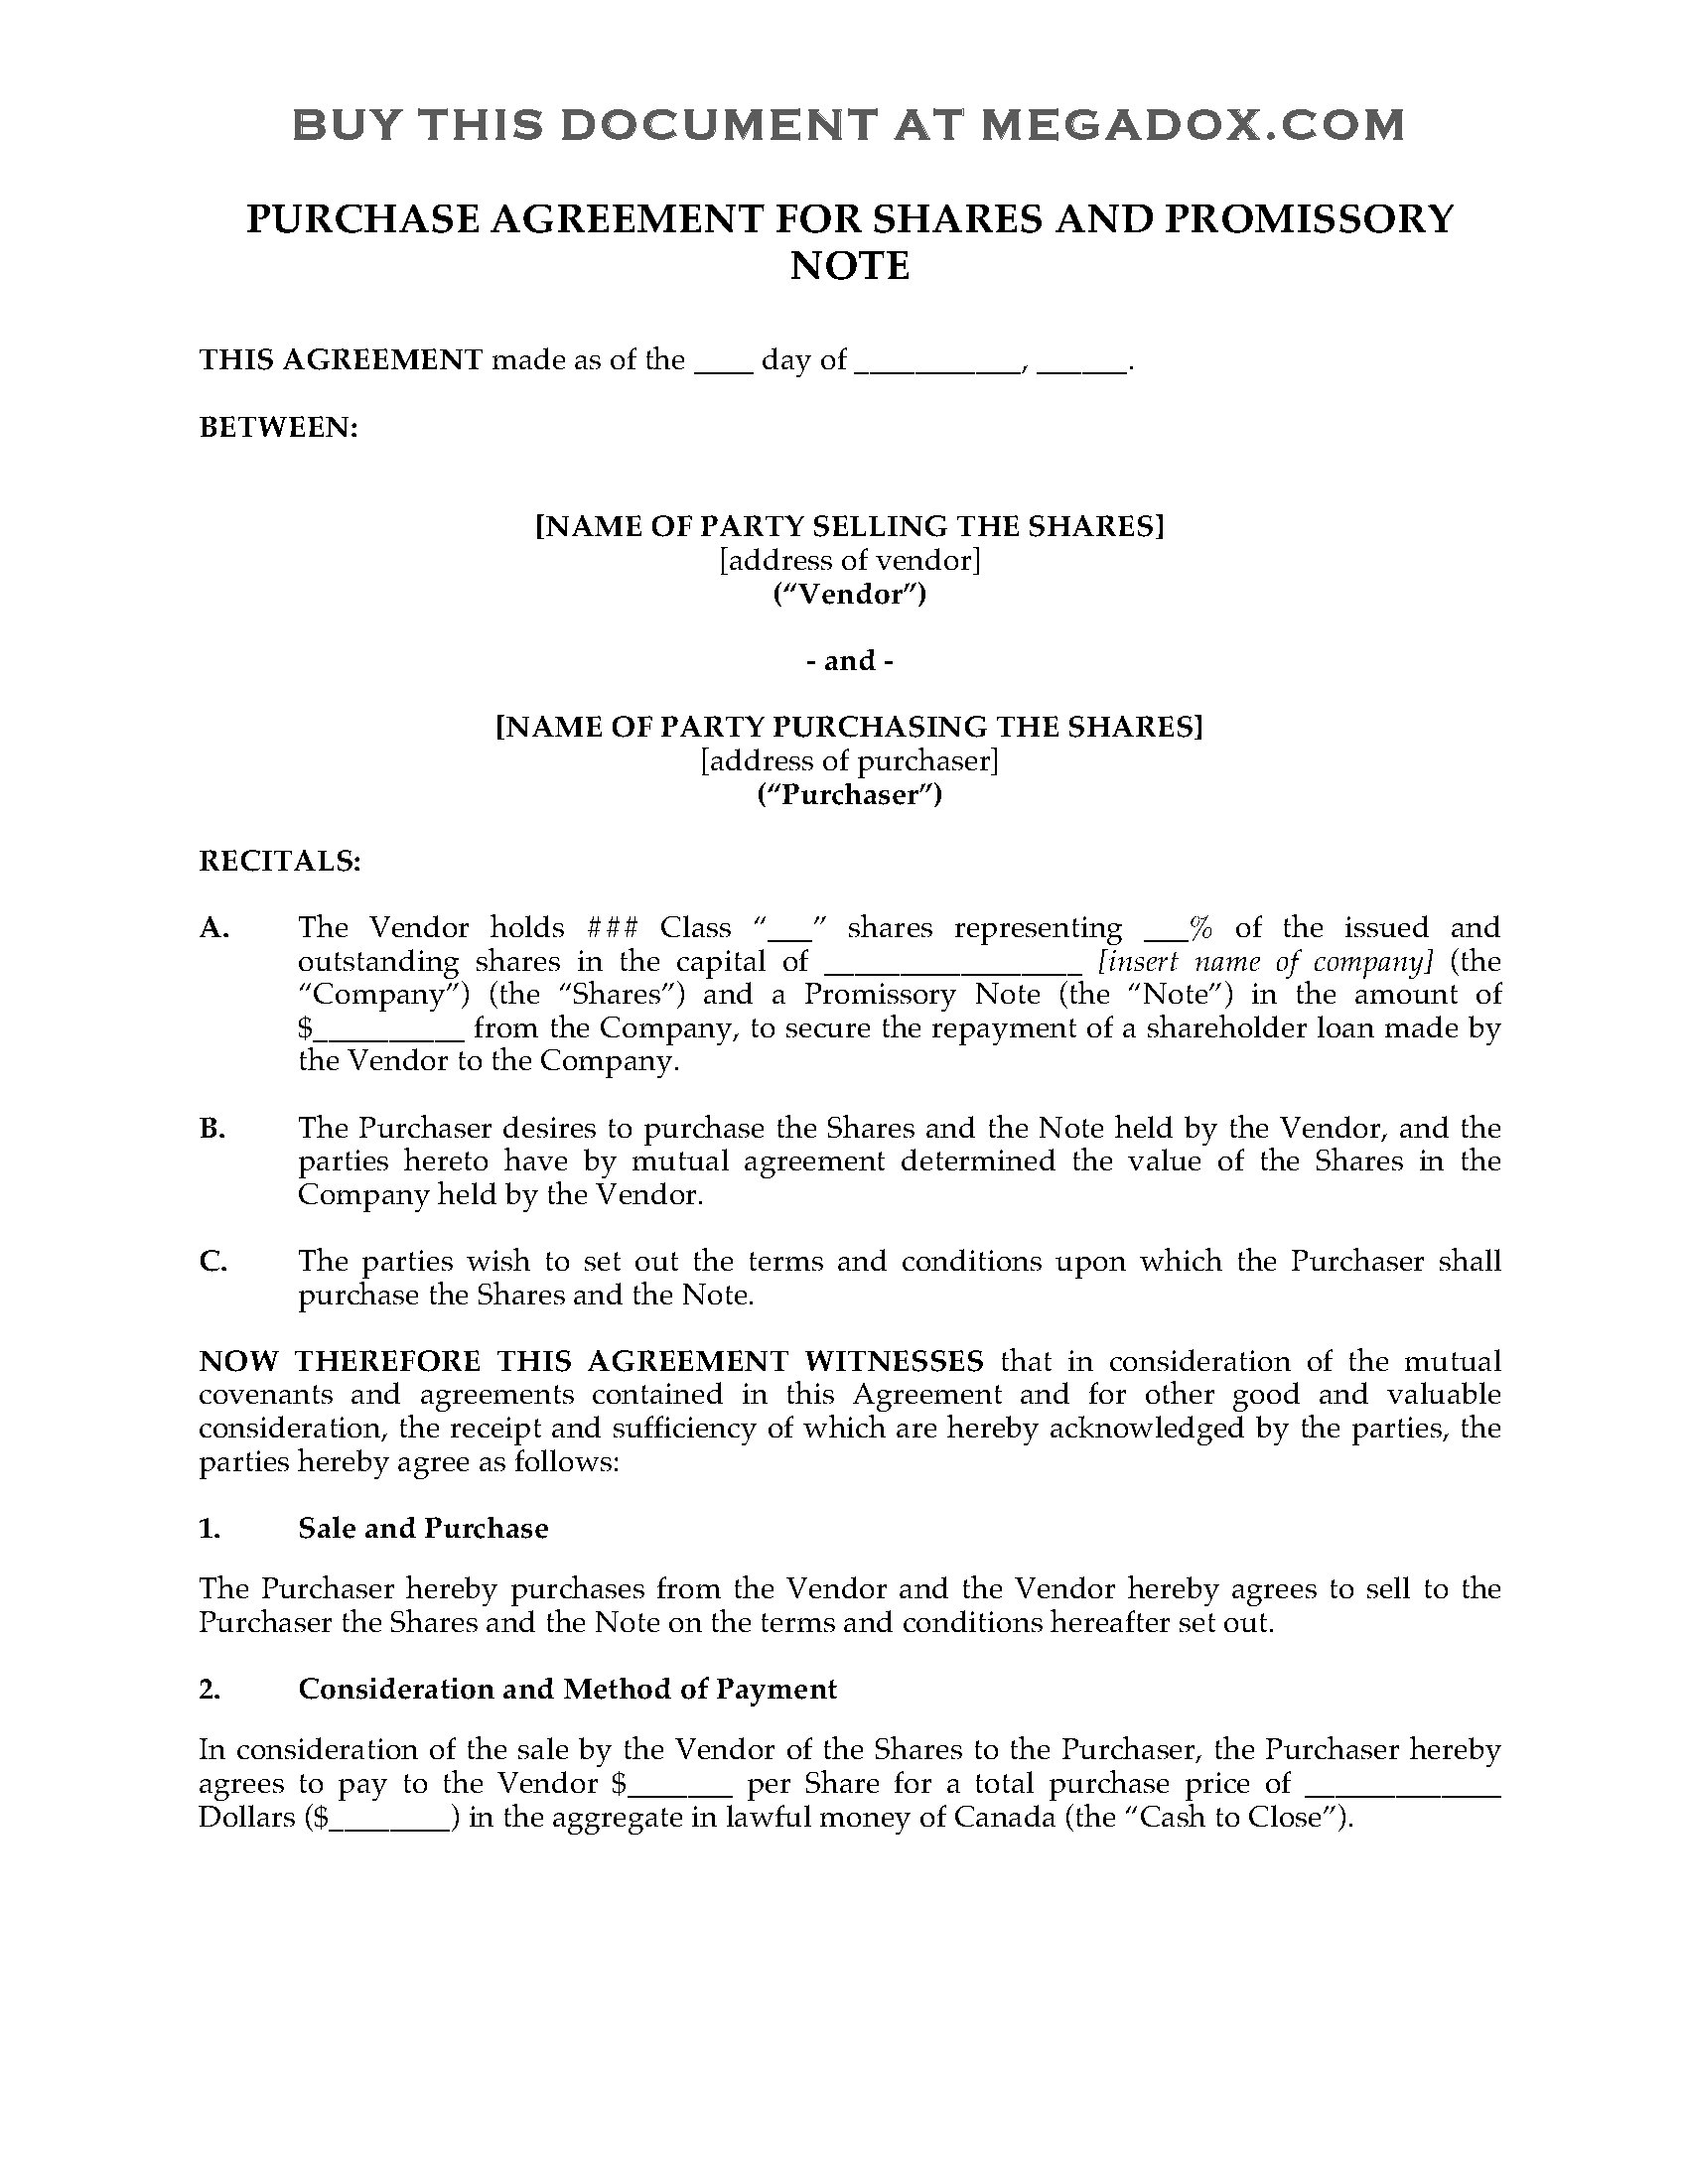 Business Transfer Agreement Canada Purchase Agreement For Shares Promissory Note